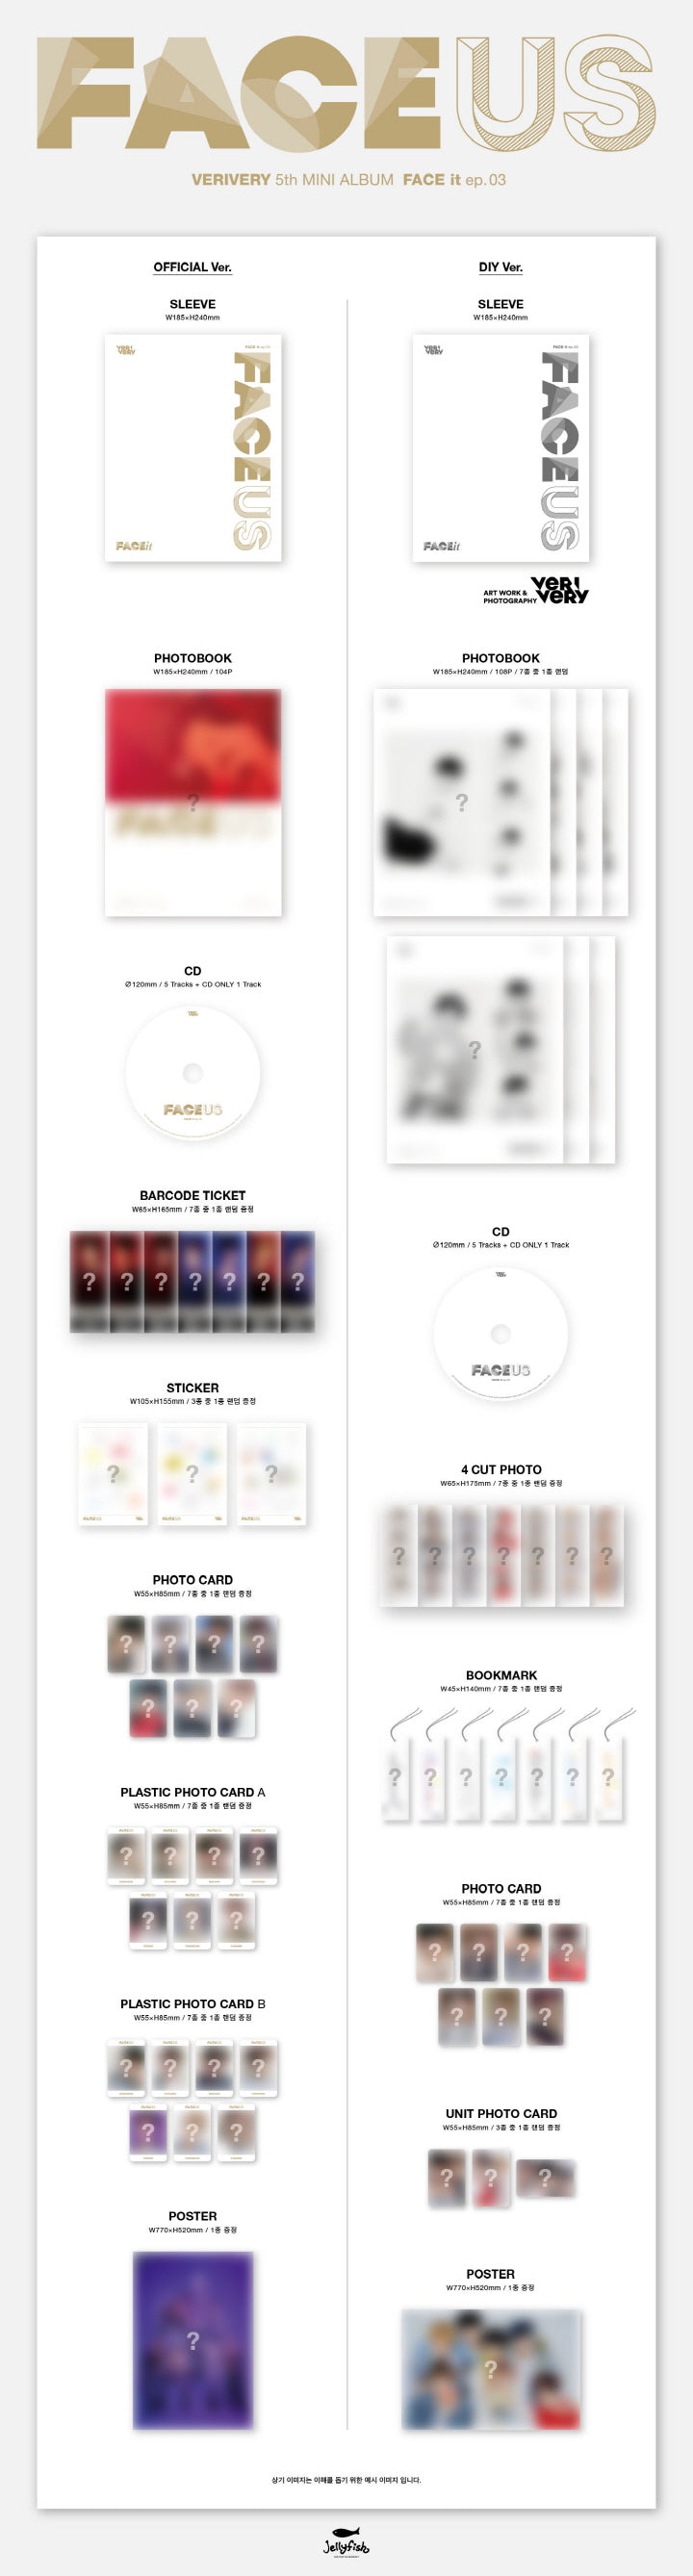 1 CD
1 Photo Book (104 pages)
1 Barcode Ticket (random out of 7 types)
1 Sticker (random out of 3 types)
1 Photo Card (ran...